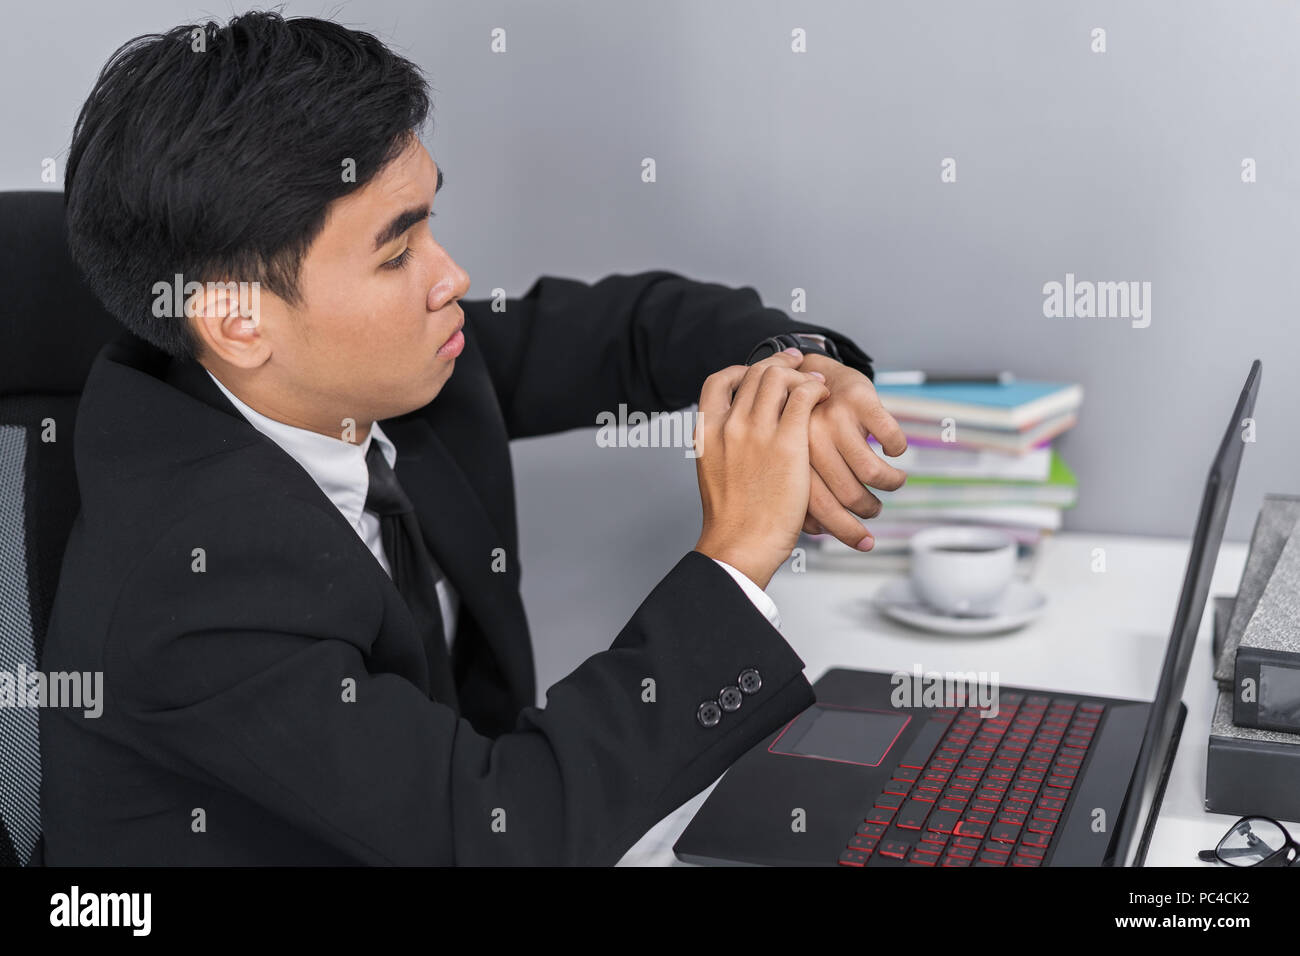 young business man checking time on watch while using laptop Stock Photo